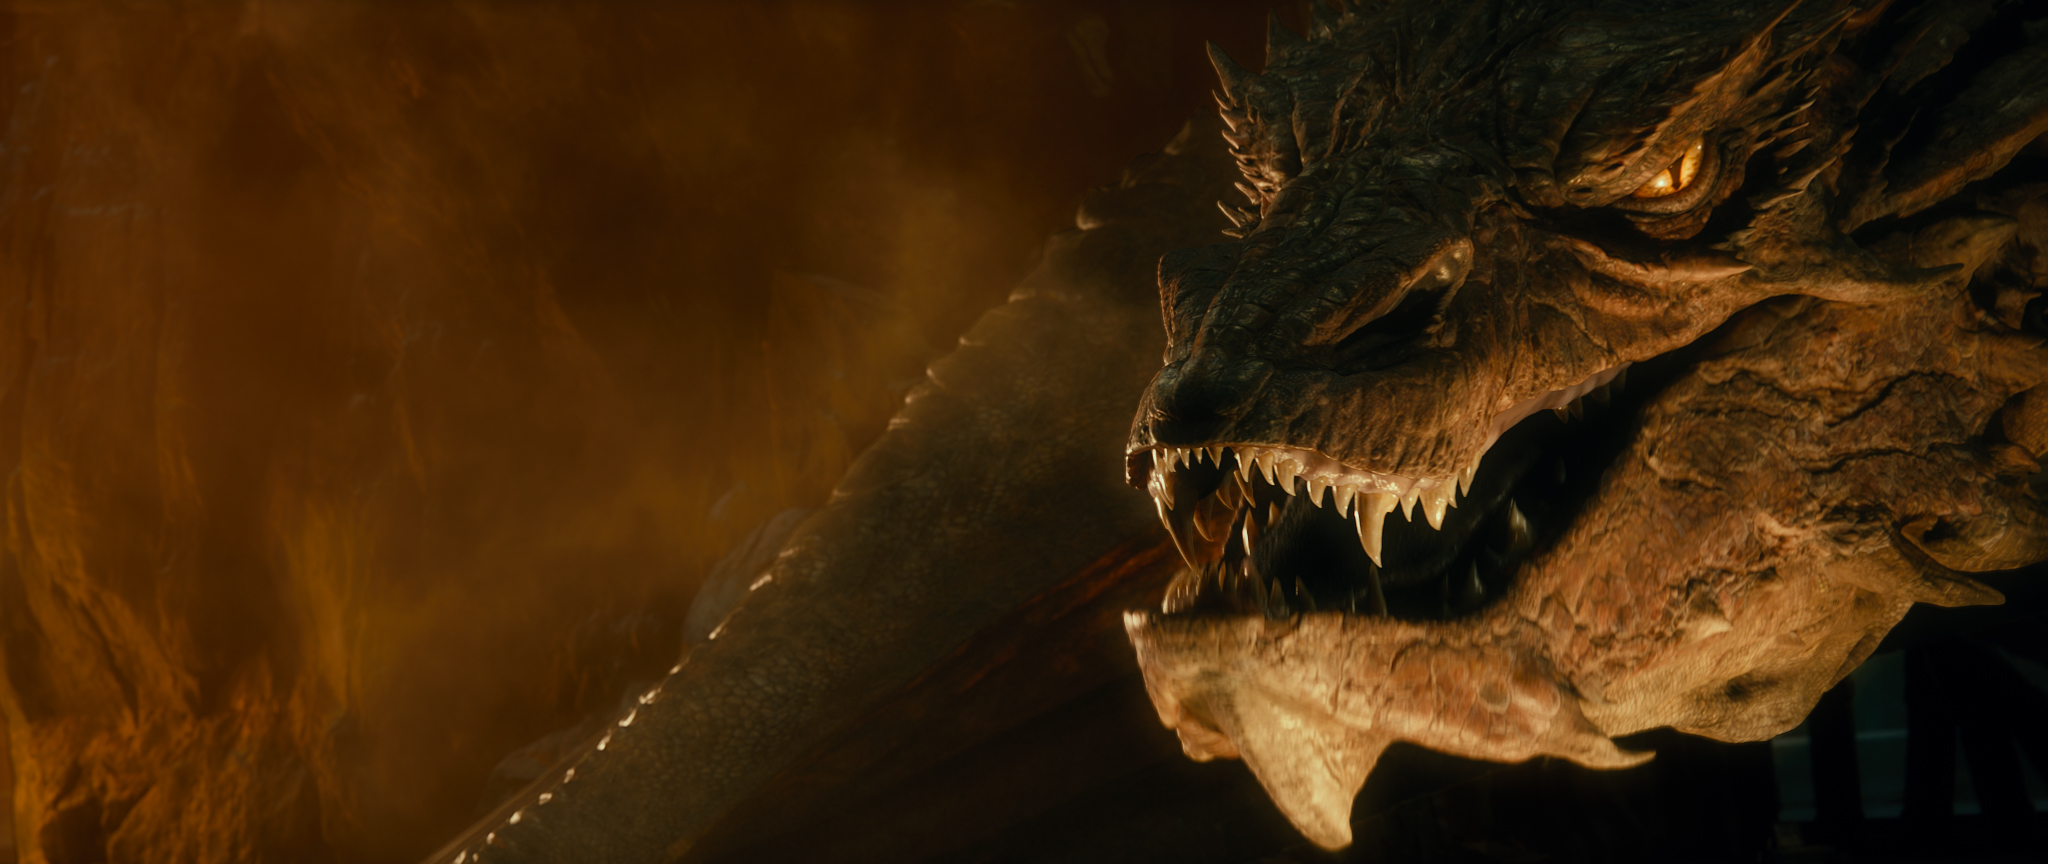 Enter the dragon: 'The Hobbit: The Desolation of Smaug' introduces the titular dragon character (voiced by Benedict Cumberbatch). | &#169; 2014 WARNER BROS. ENTERTAINMENT INC. AND METRO-GOLDWYN-MAYER PICTURES INC.